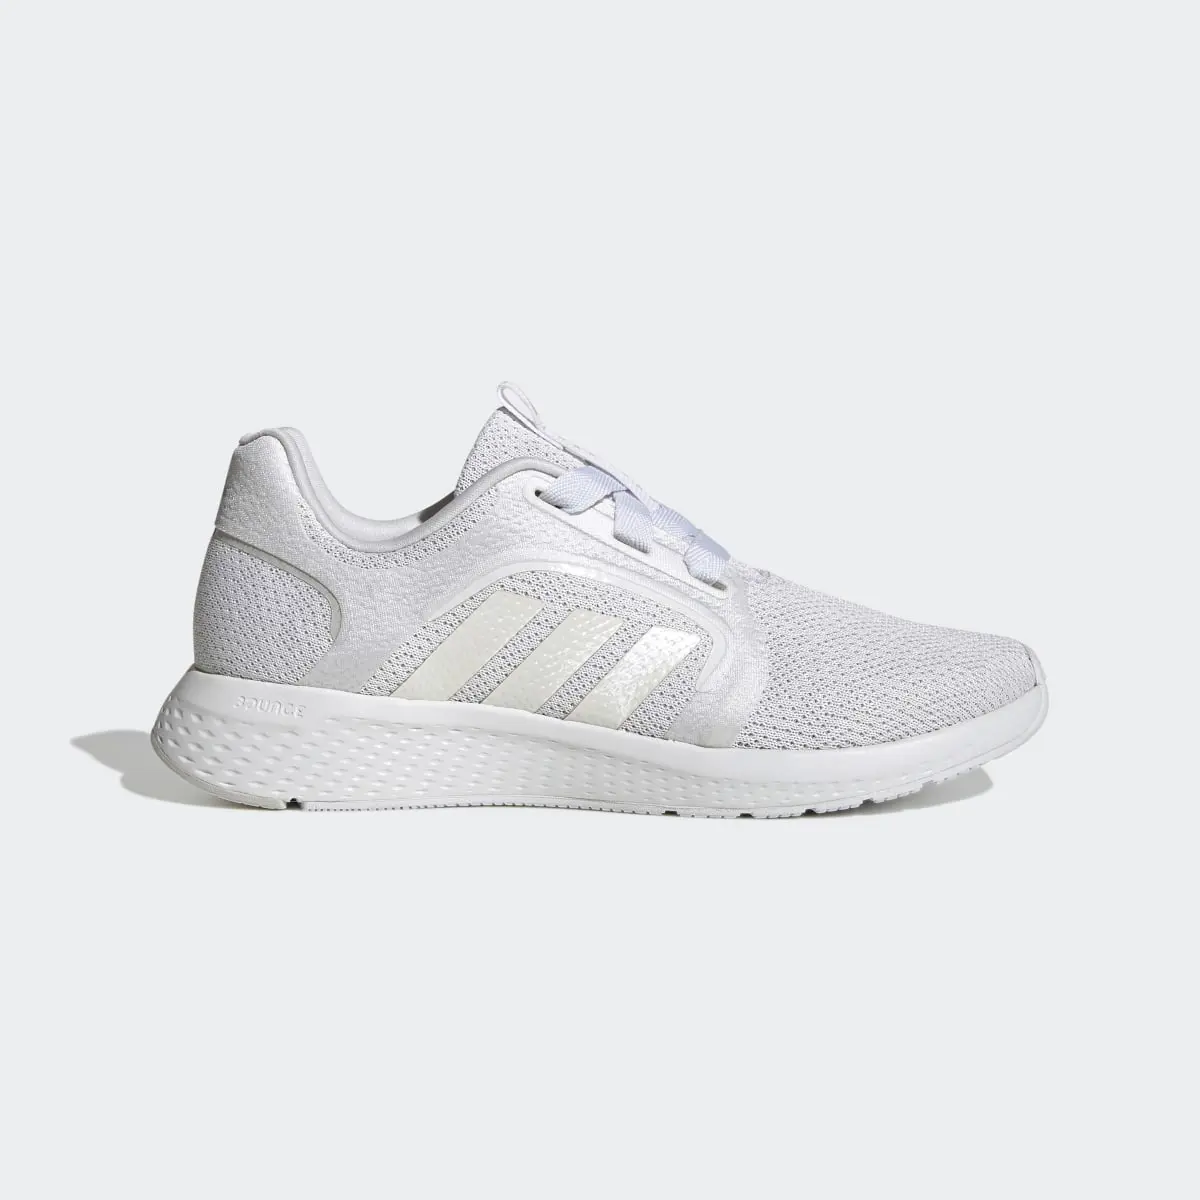 Adidas Edge Lux Shoes. 2